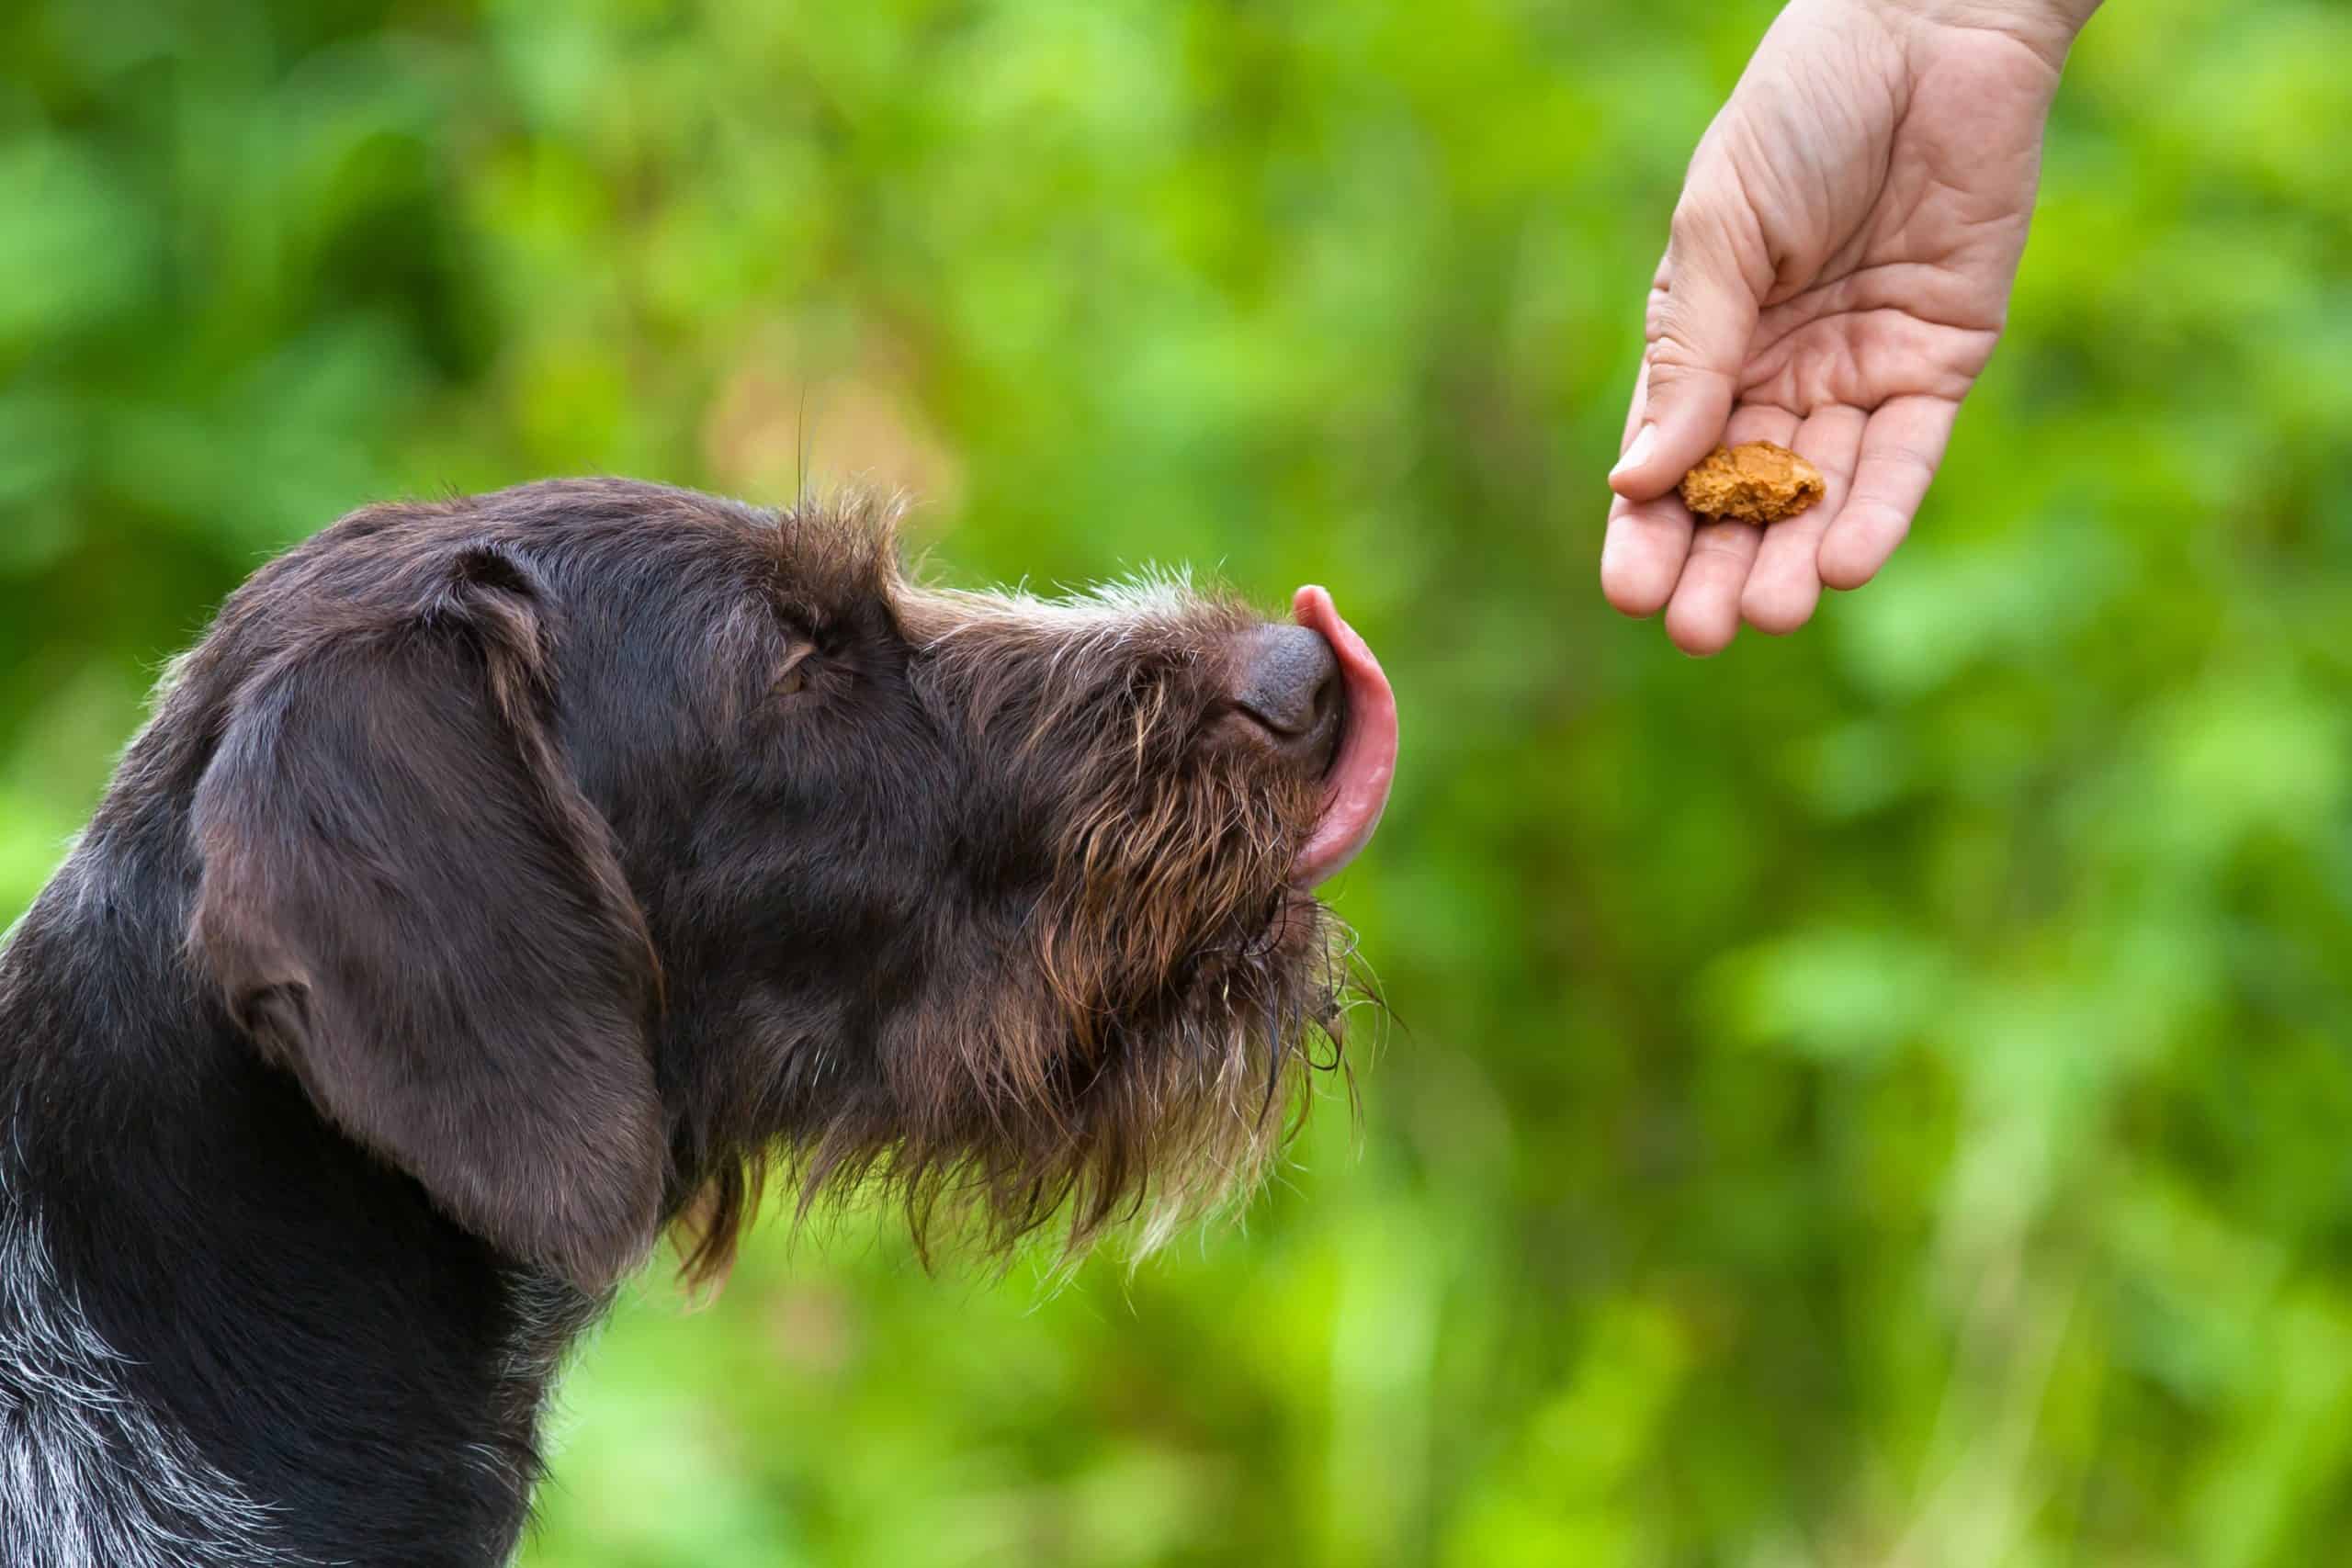 Owner gives dog treat during training. Dog training benefits include dog safety, bonding between pet and owners, better control, improved dog health, and socialization.